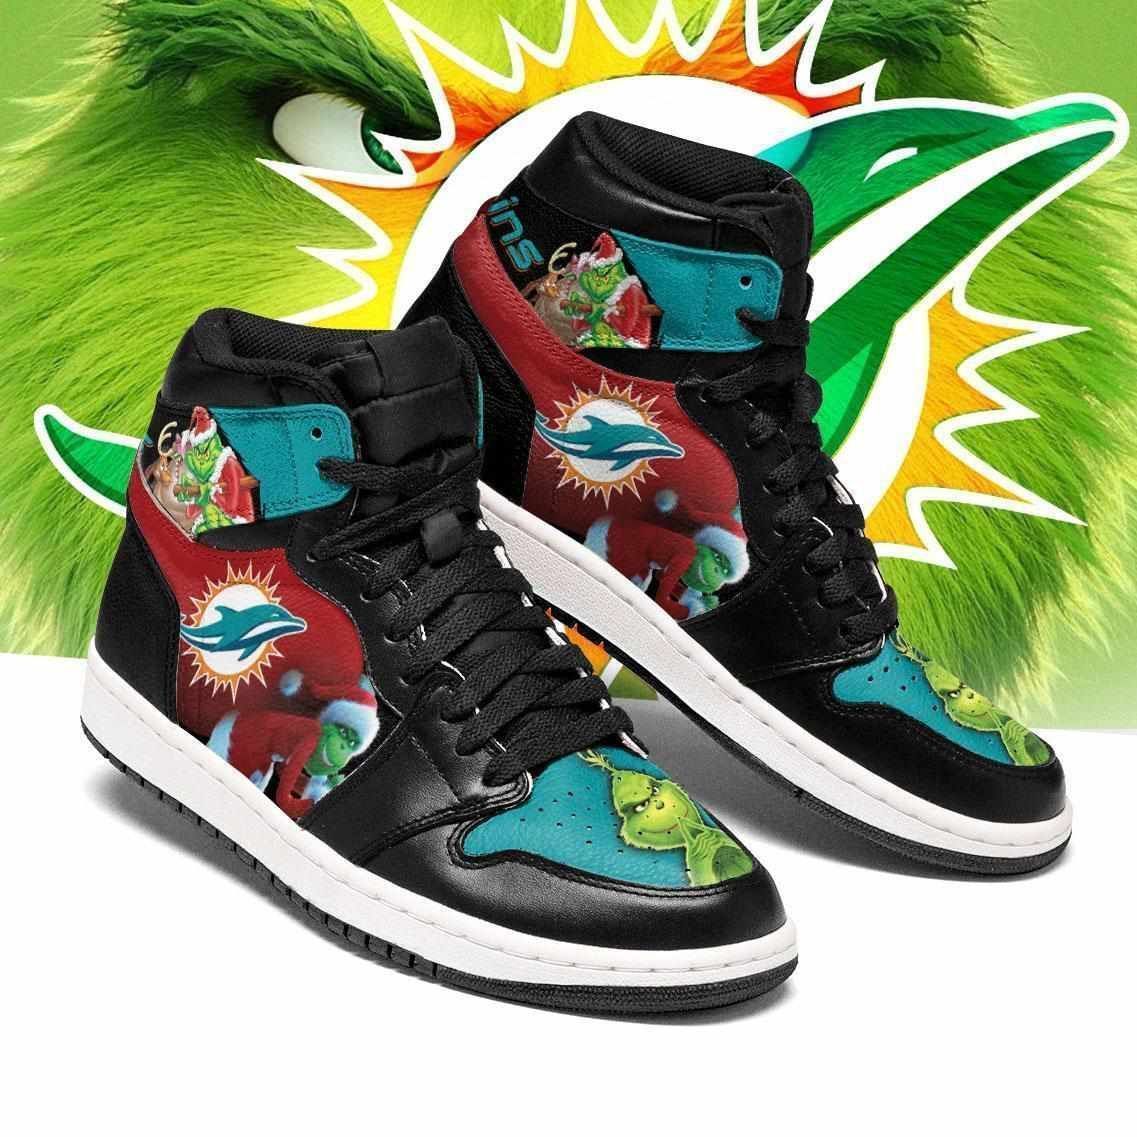 Nfl The Grinch Miami Dolphins Air Jordan 2021 Shoes Sport Sneakers